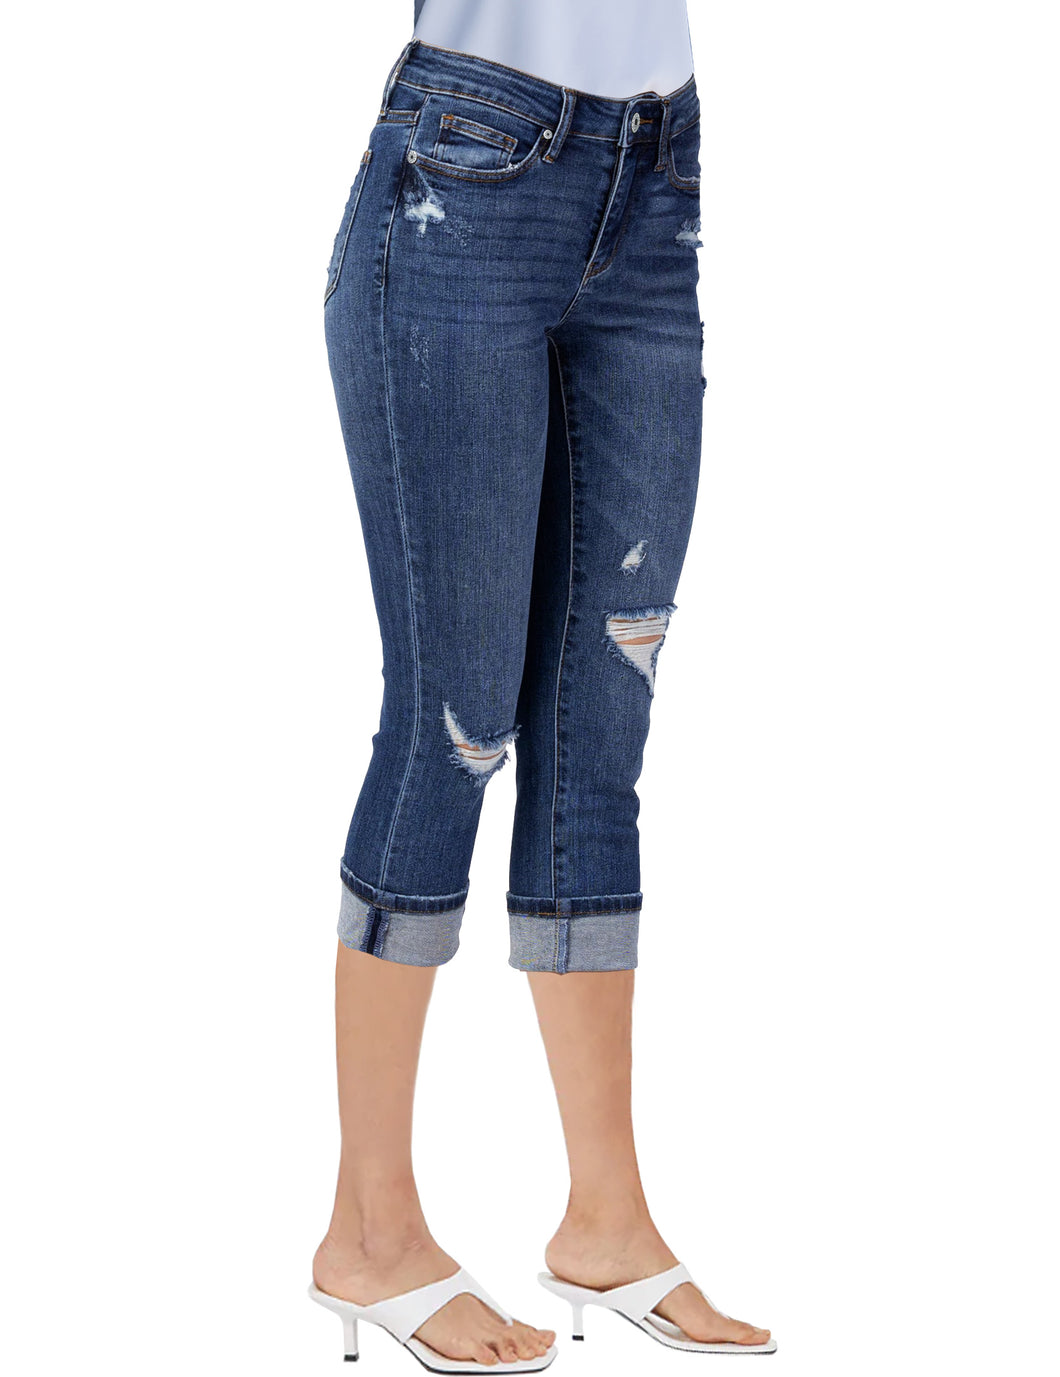 luvamia Jean Capris for Women High Waisted Summer Casual Ripped